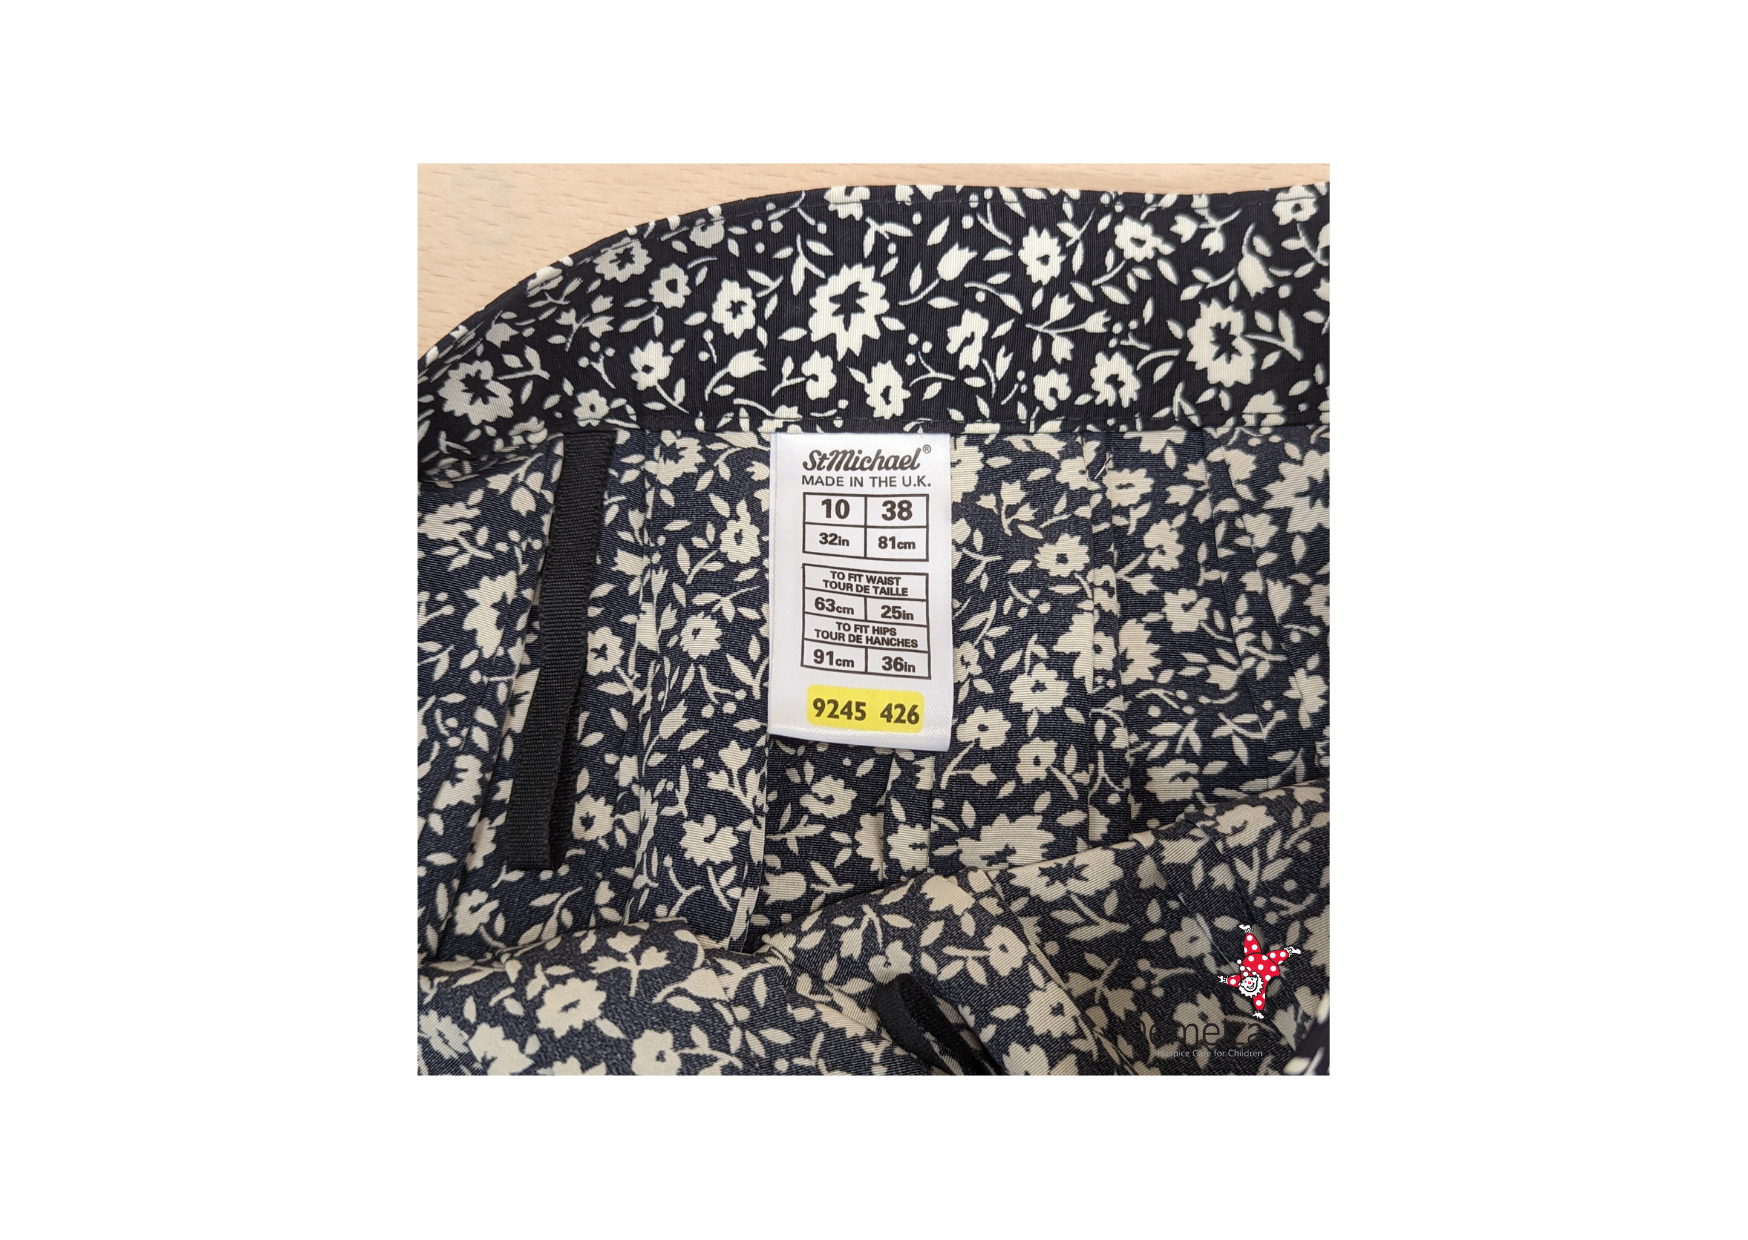 Black and white ditsy floral print vintage St Michael's skirt